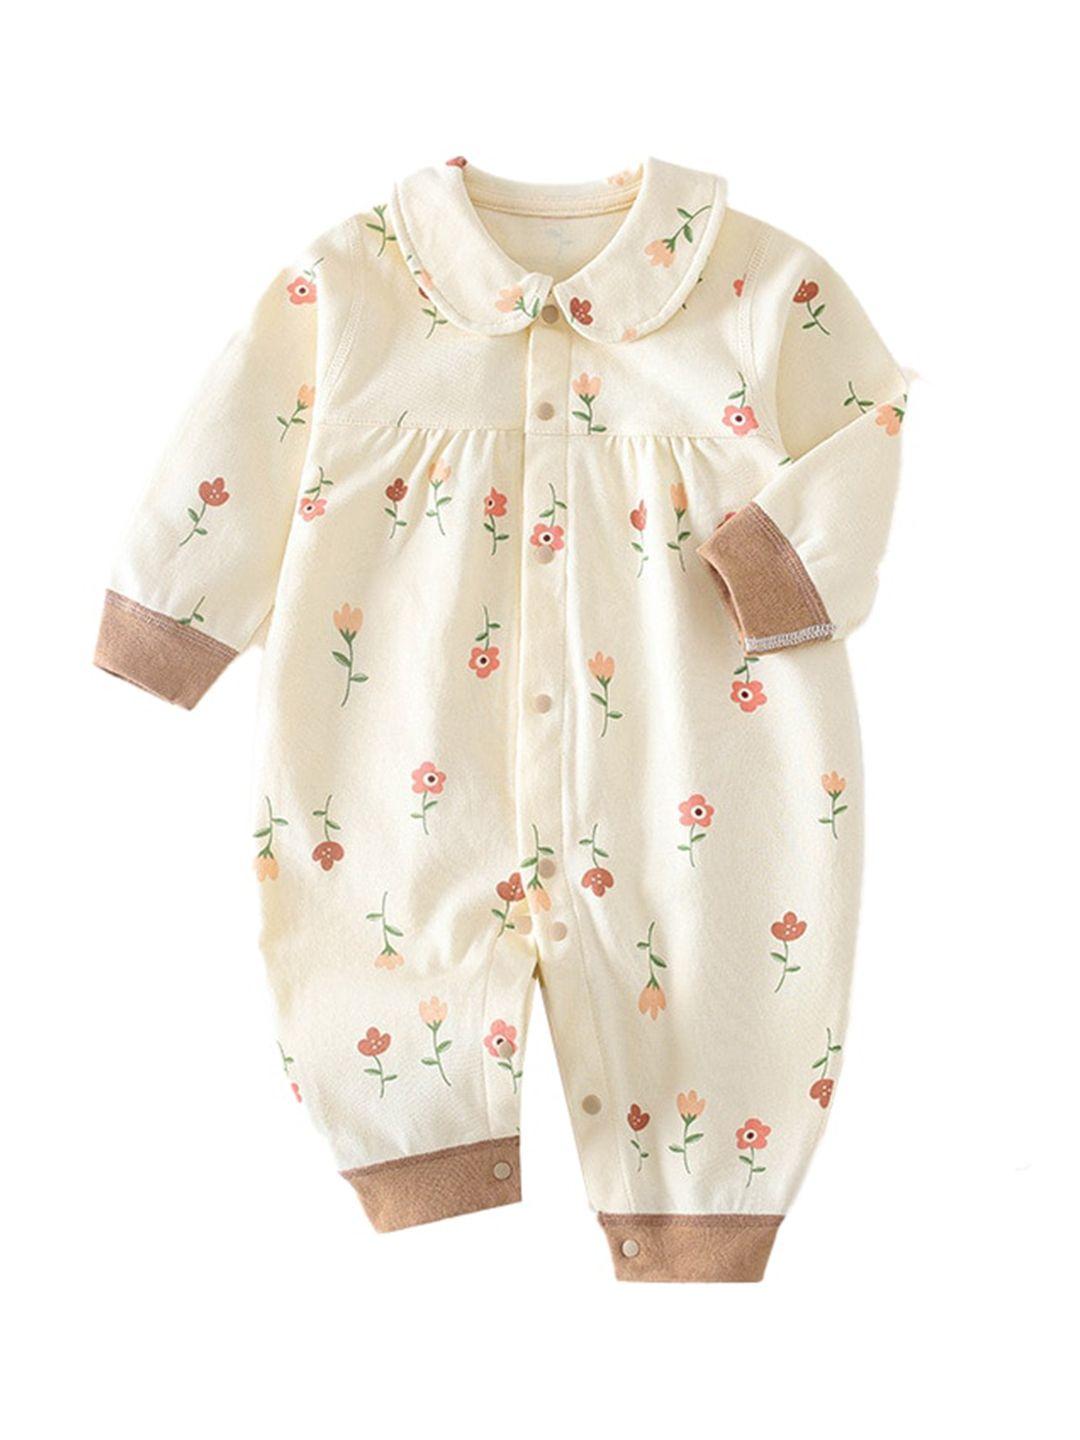 stylecast-infant-girls-printed-cotton-rompers